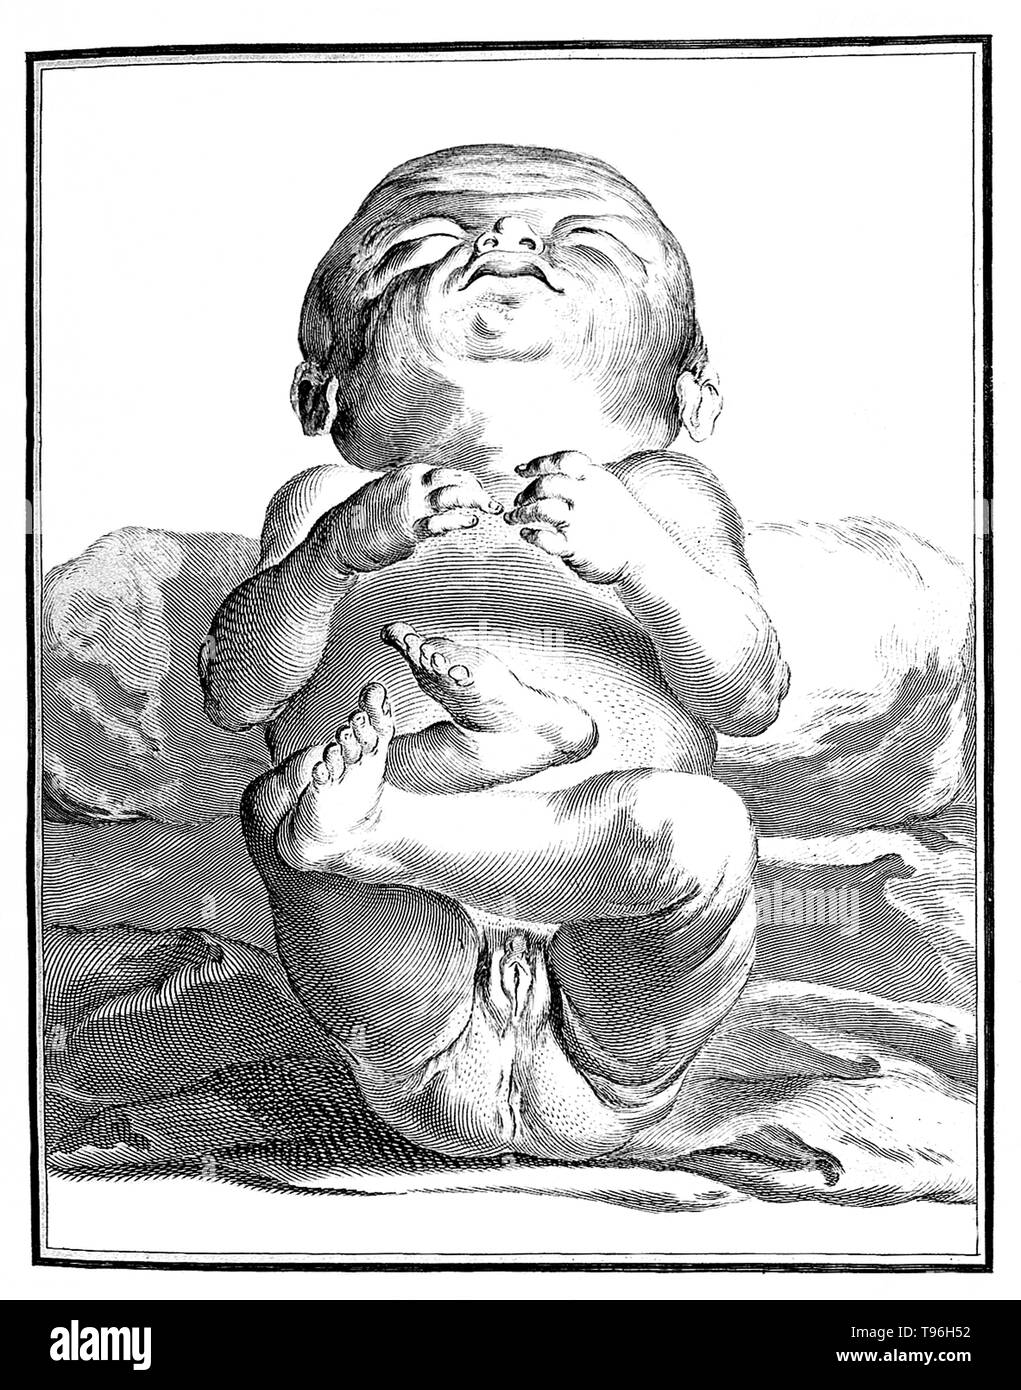 Comte de Buffon: Histoire Naturelle, V.III. Drawing of a human baby. The Histoire Naturelle, générale et particulière, avec la description du Cabinet du Roi (Natural History, General and Particular, with a Description of the King's Cabinet) is an encyclopedic collection of 36 large (quarto) volumes written between 1749-1804 by the Comte de Buffon, and continued in eight more volumes after his death by his colleagues. Stock Photo